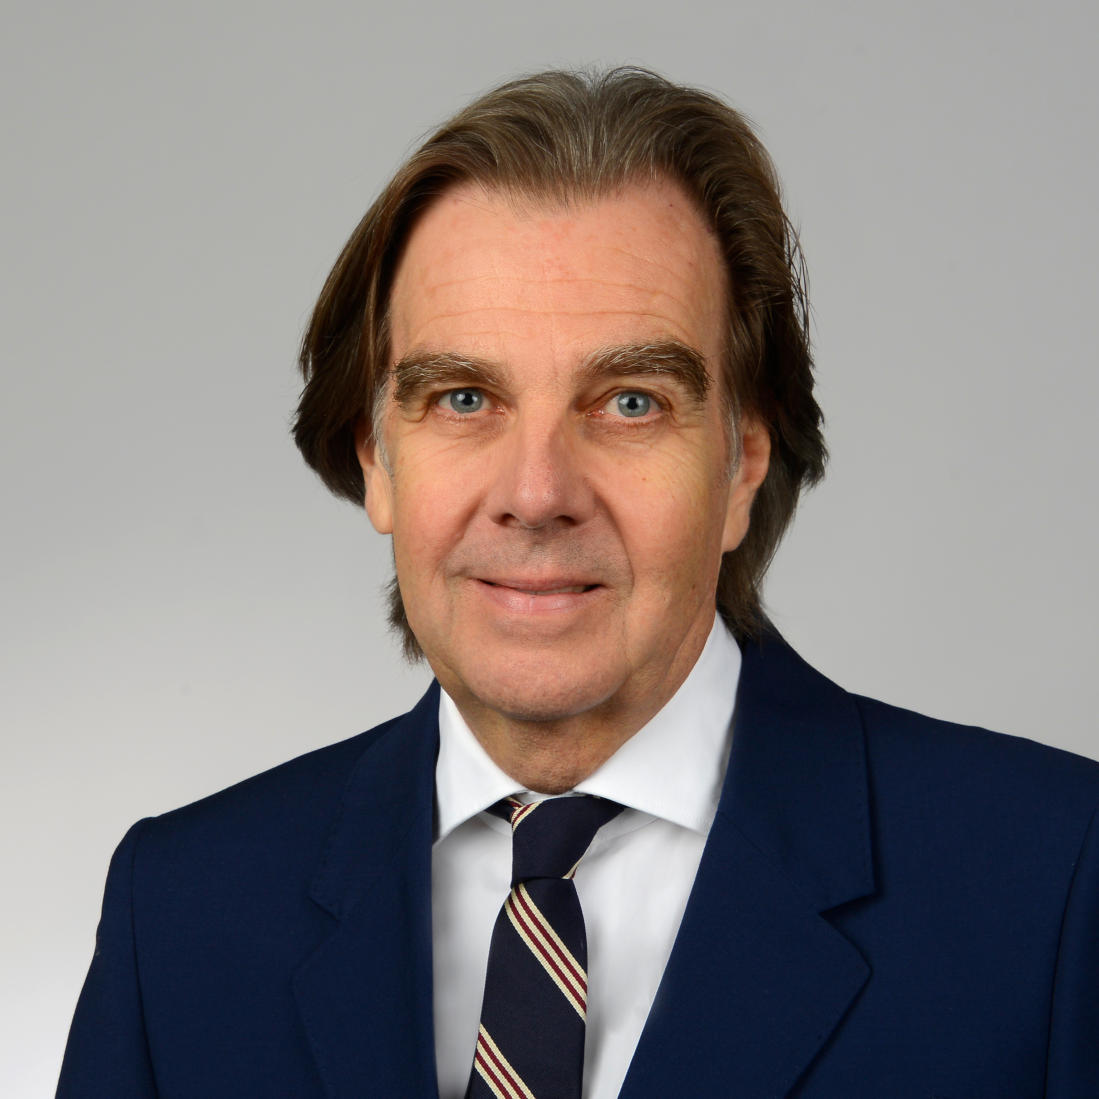 andreas_schleusener_chief_executive_officer